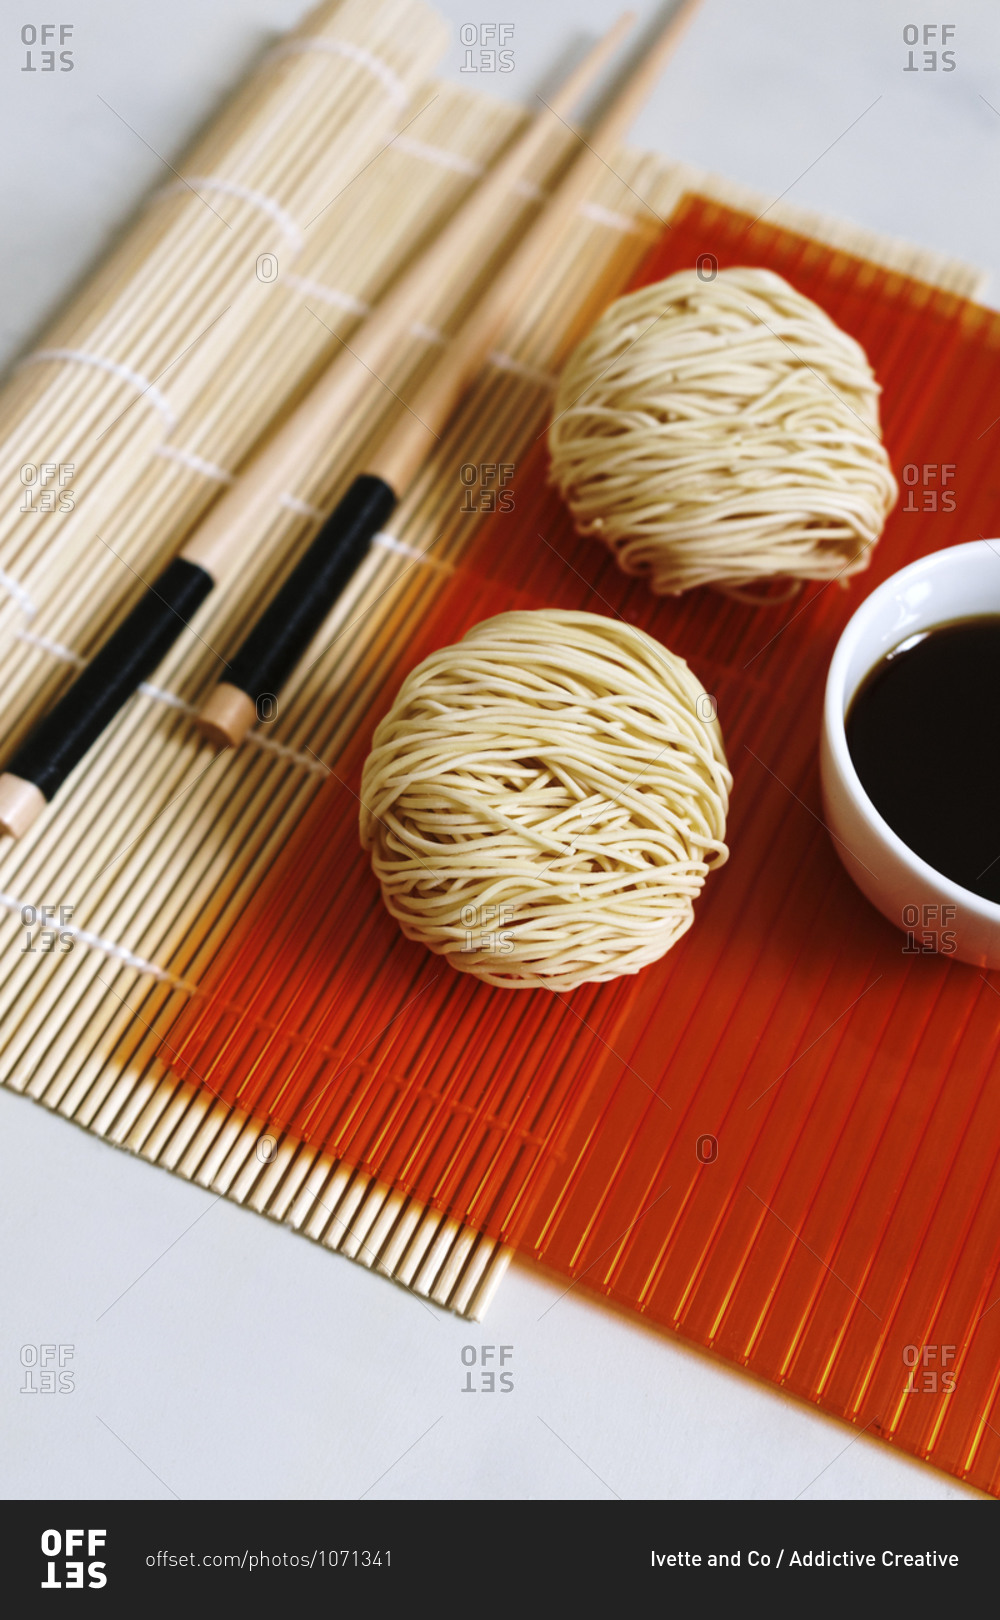 High angle of arrangement of round shaped dry noodles and soy sauce on table with wooden chopsticks